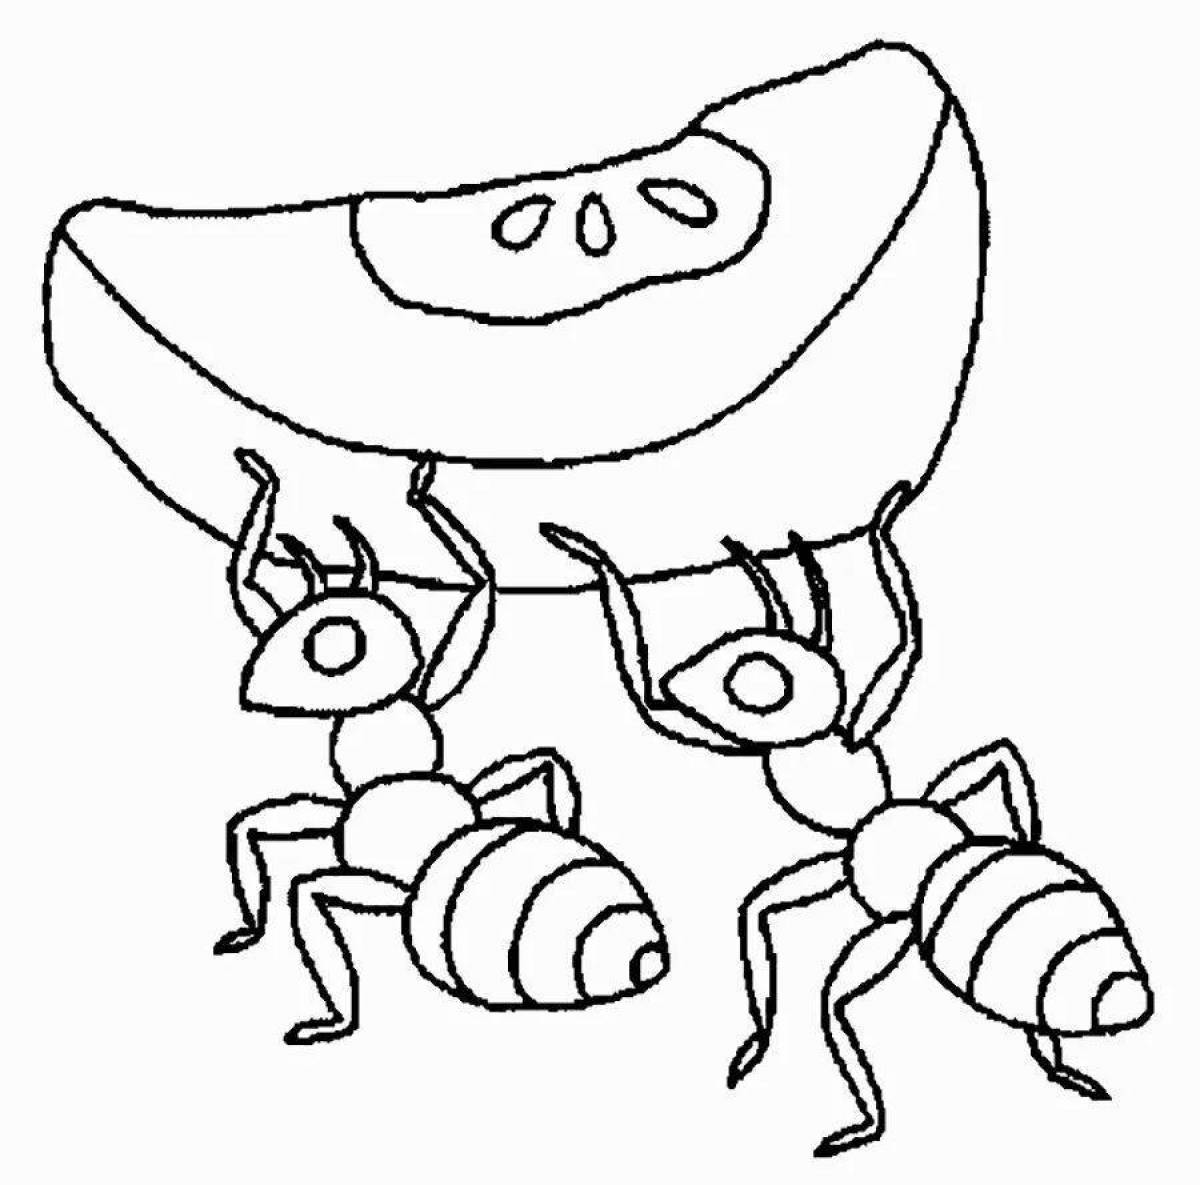 Jolly ant coloring book for kids